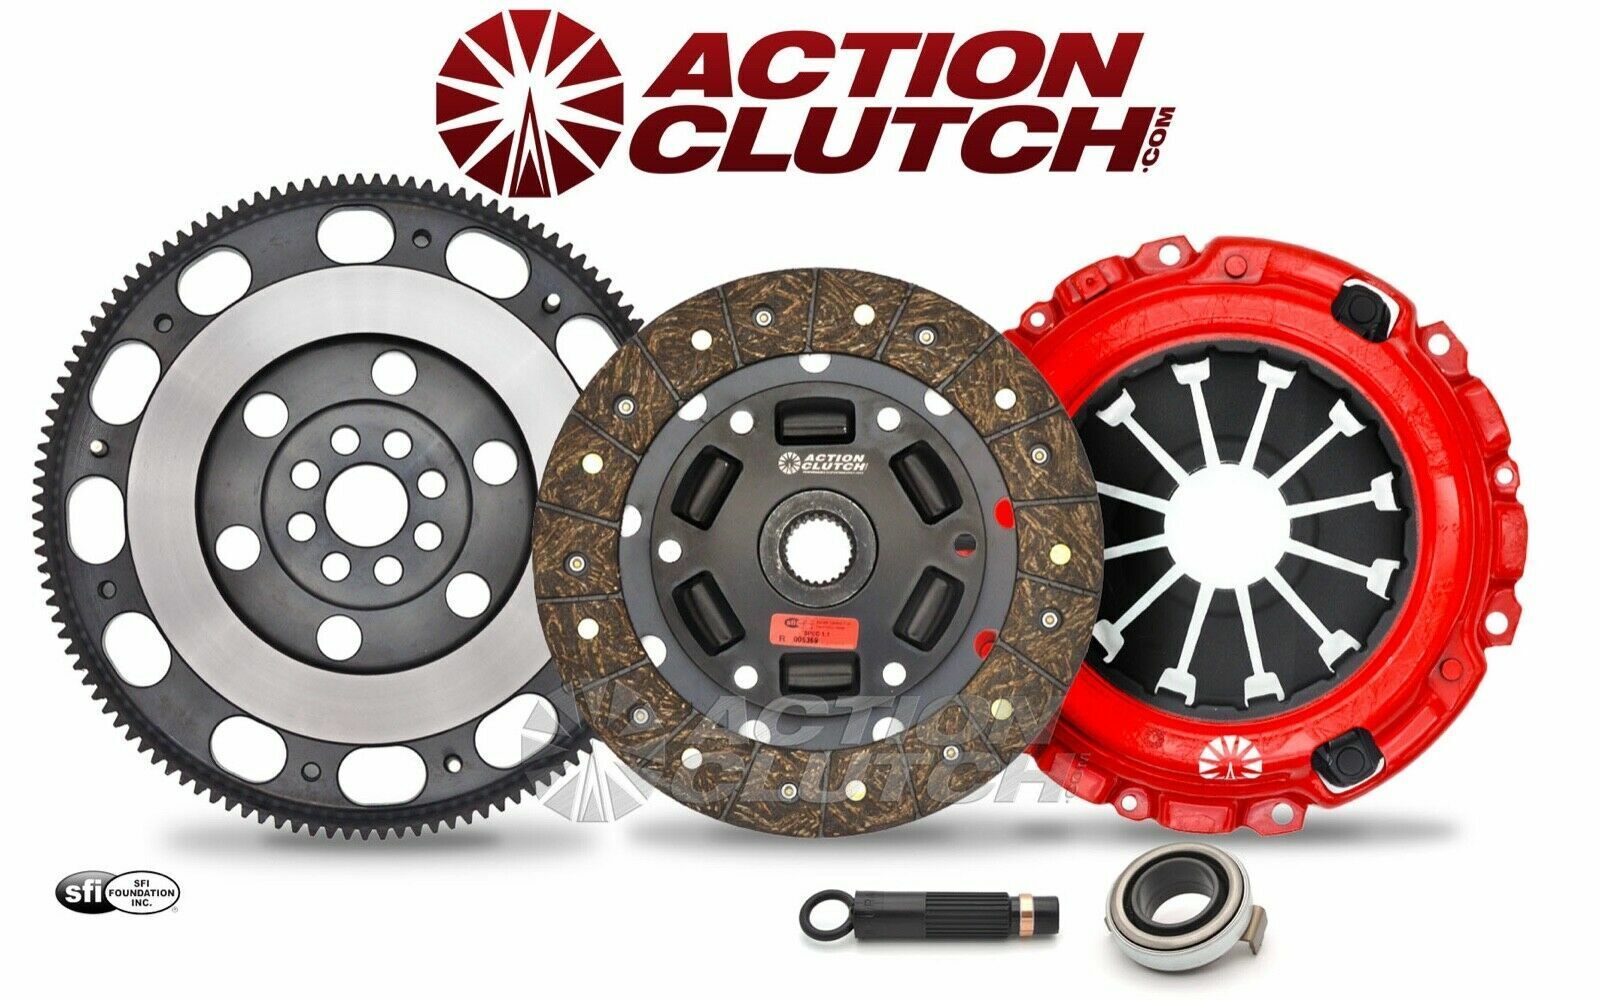 ACR STAGE 1 CLUTCH KIT and RACING FLYWHEEL for RSX TSX / ACCORD CIVIC Si K20 K24